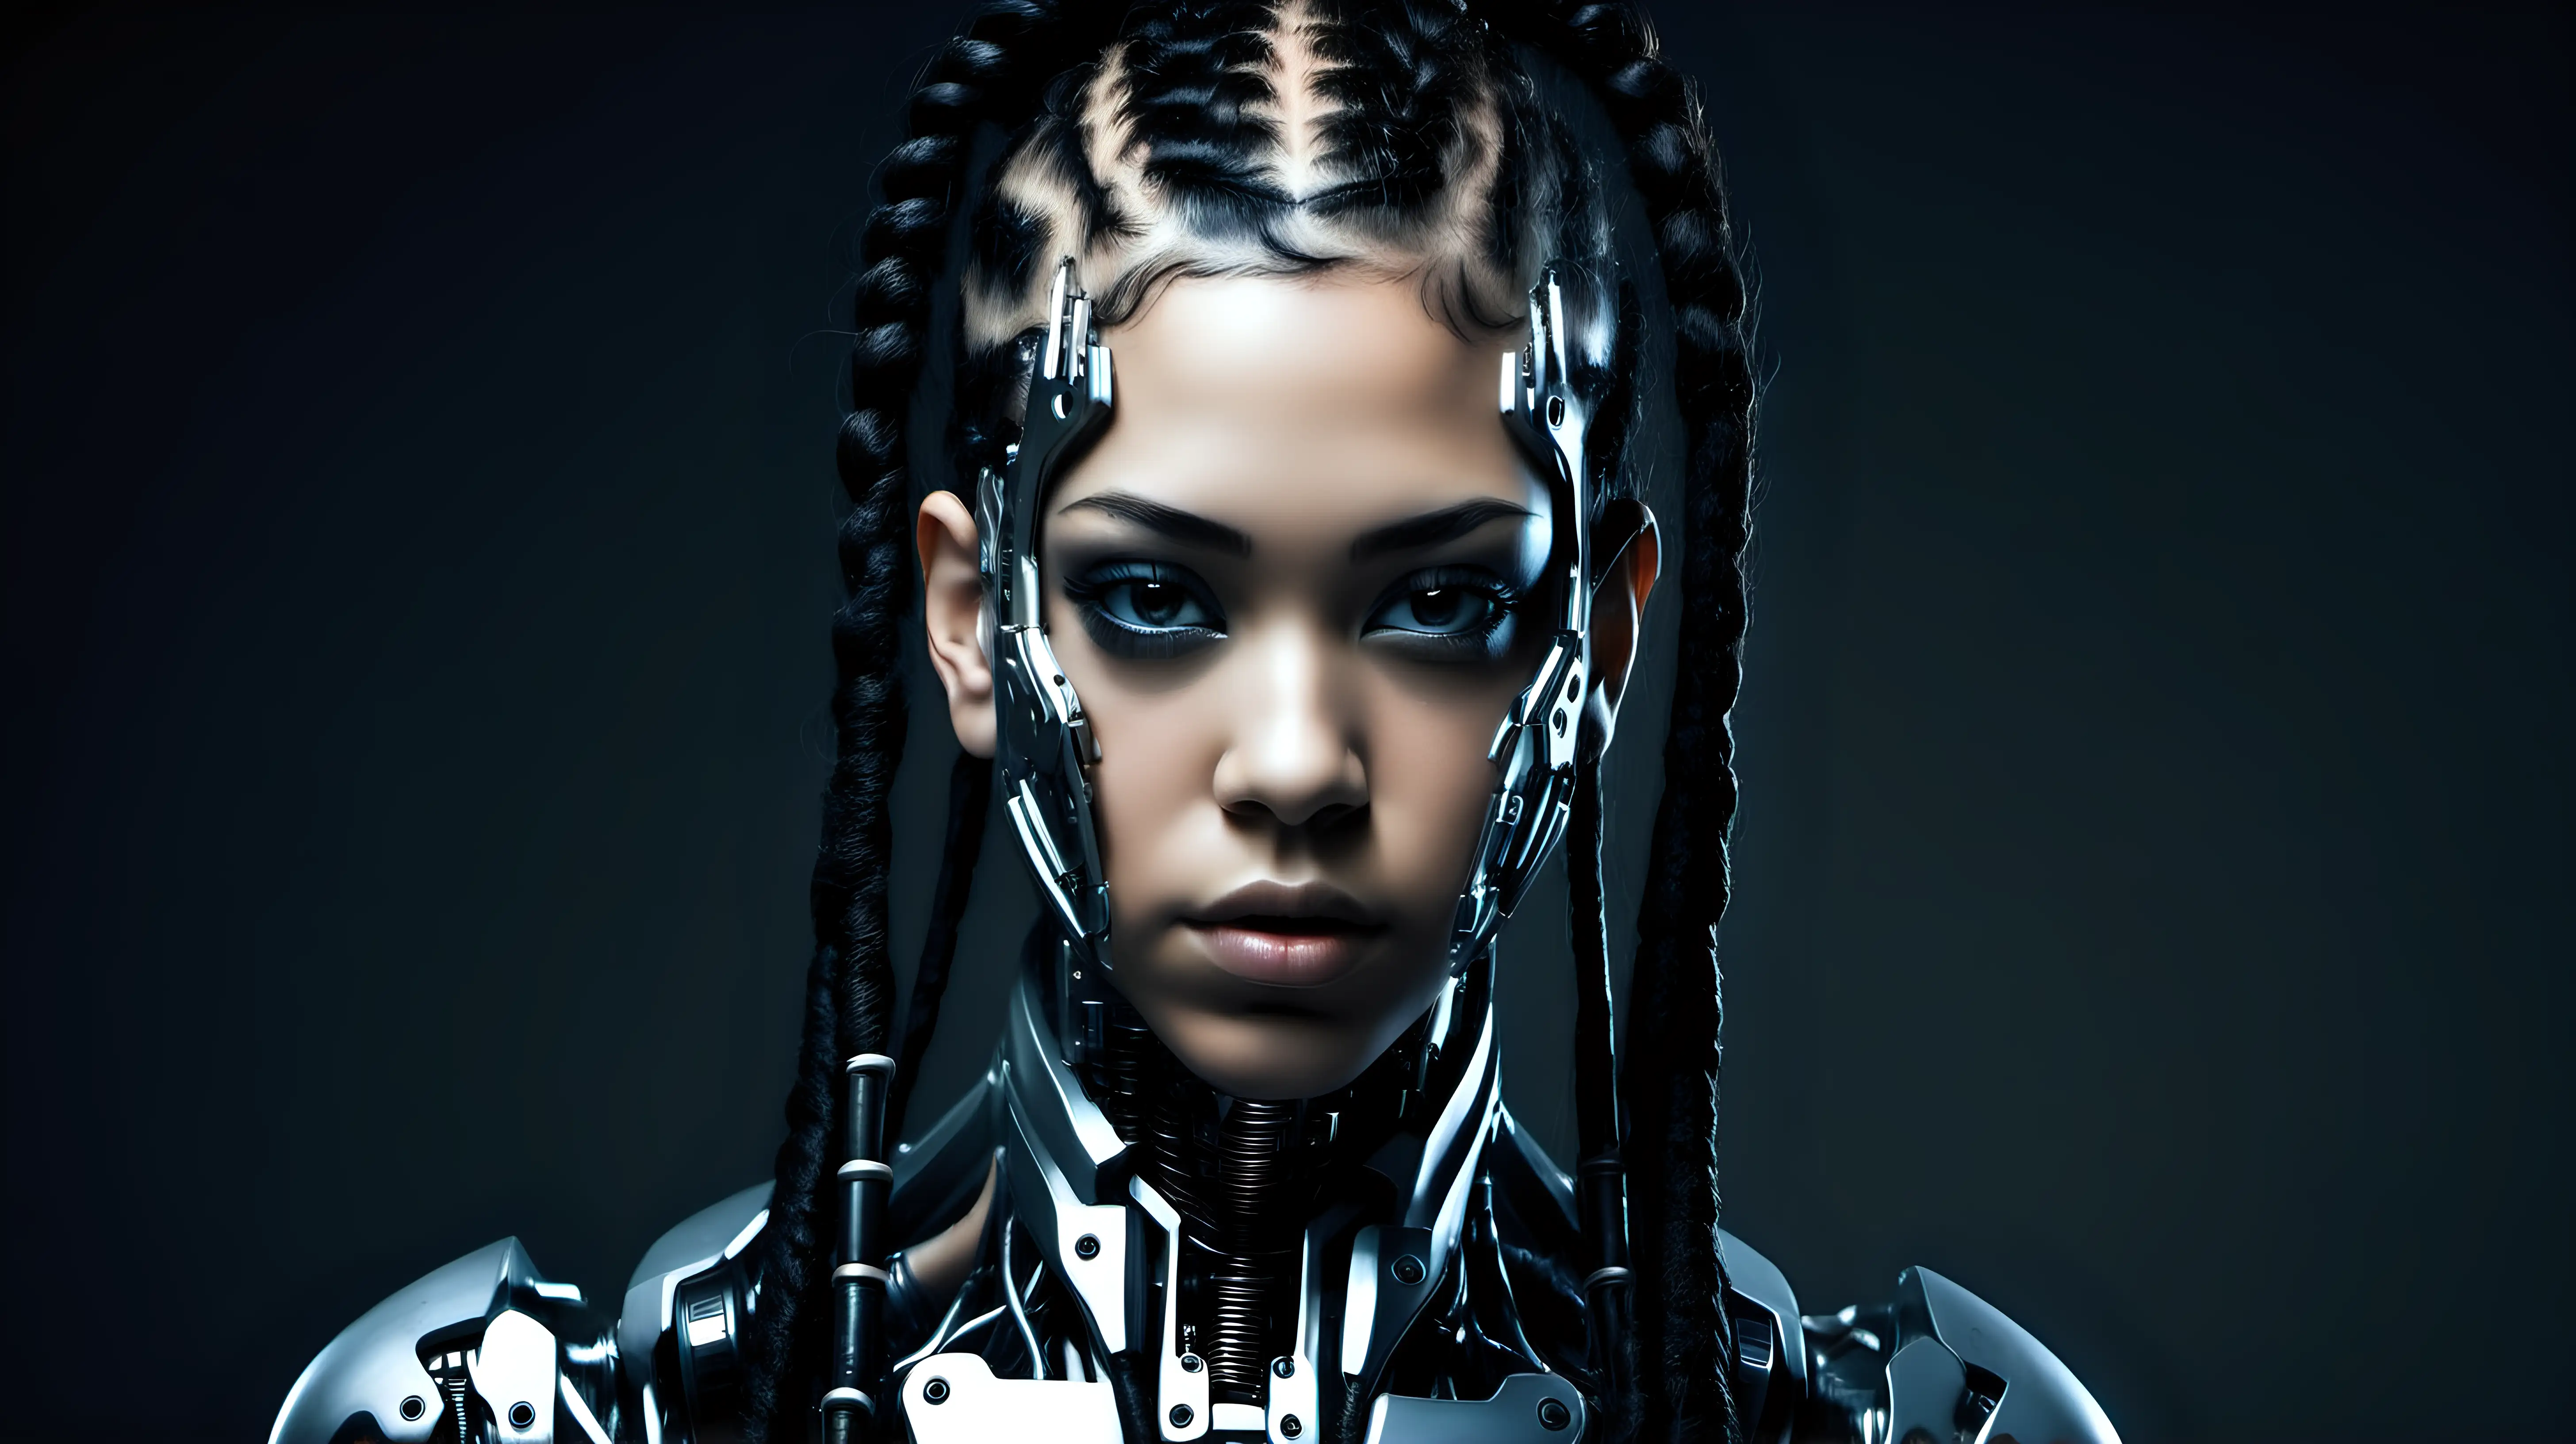 Cyborg woman, 18 years old. She has a cyborg face, but she is extremely beautiful.  Wild hair. Dark braids.